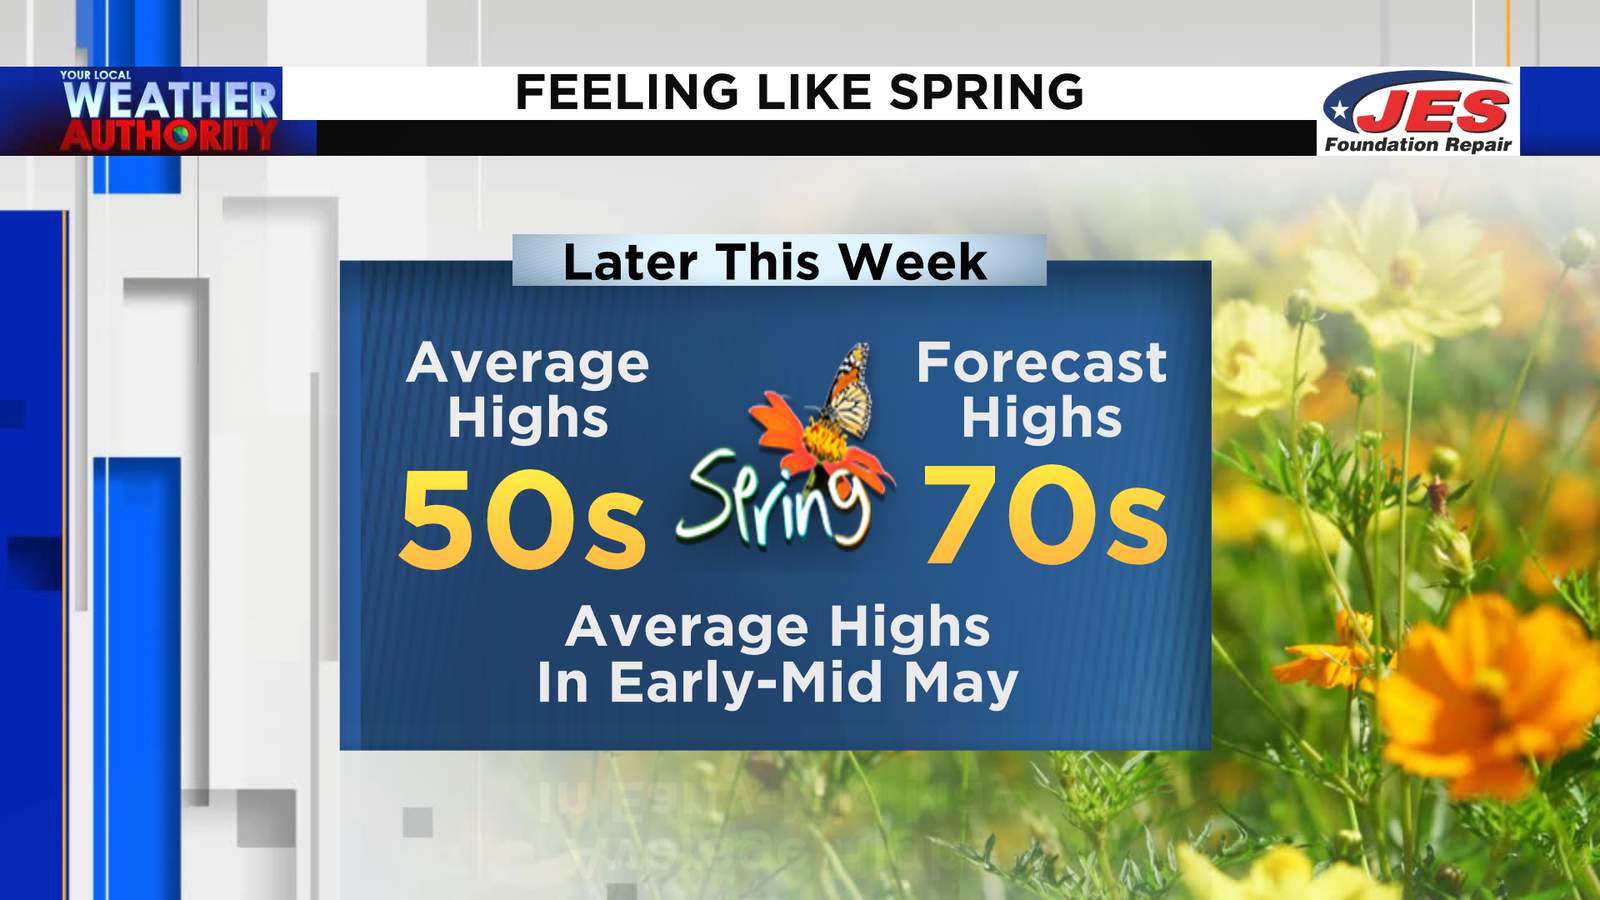 Get ready! A sampling of April and May warmth to come the next few days